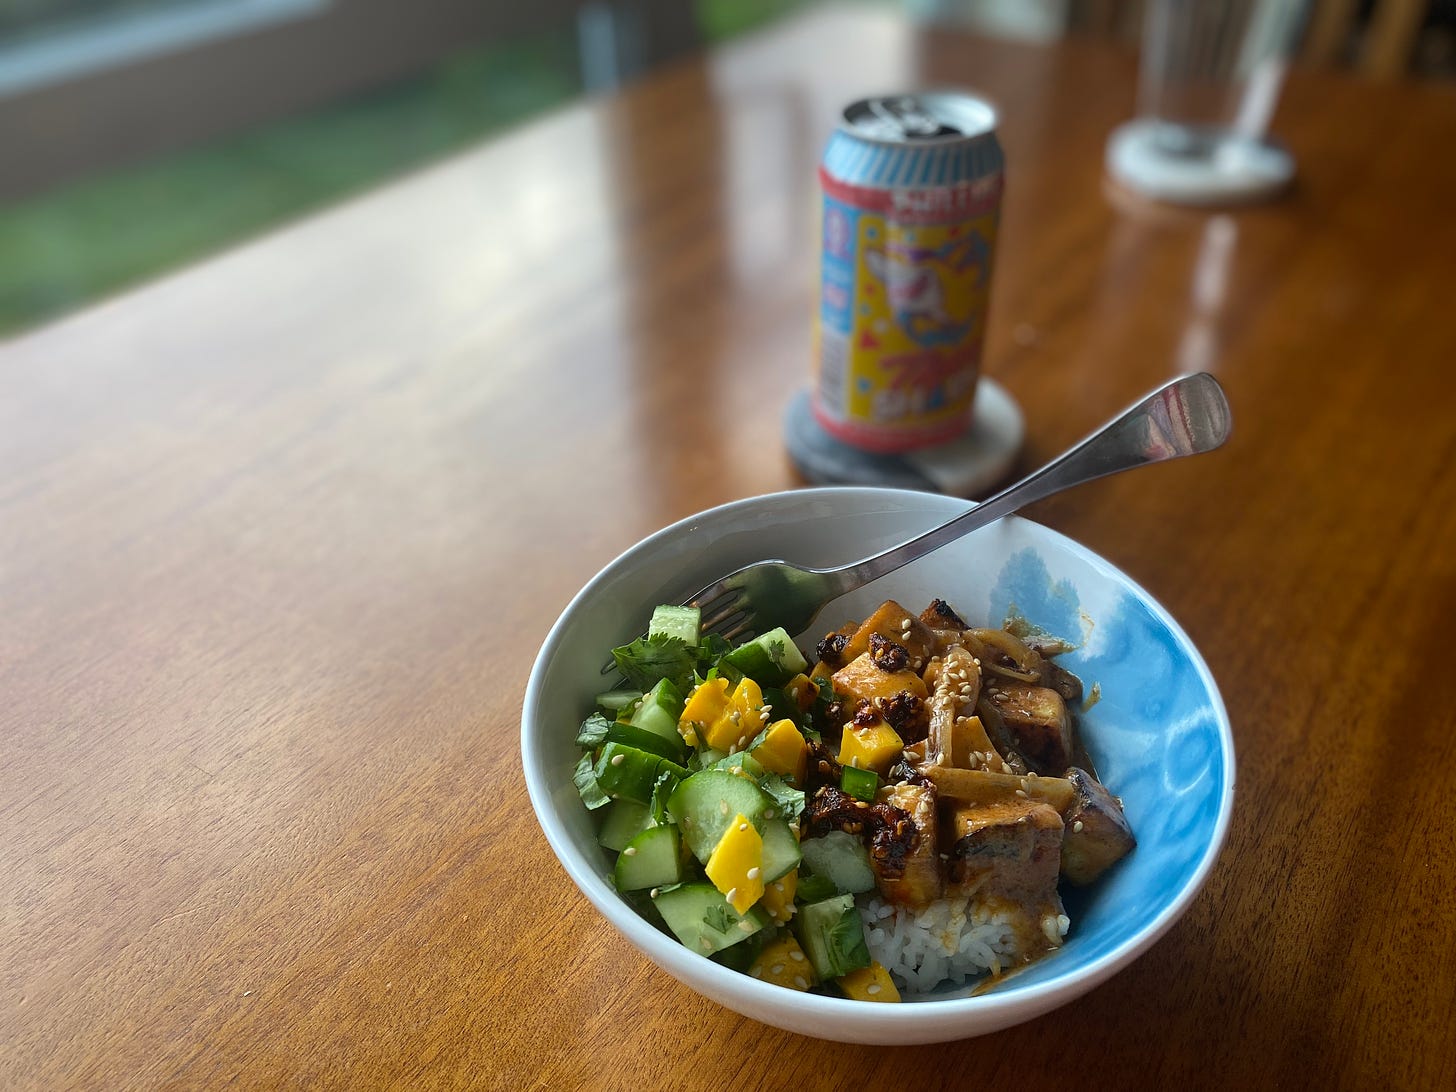 A white and blue bowl of the rice dish described above: red curry tofu and onions on one side, the mango cucumber salad on the other. Chili crisp is drizzled over top, and a can of beer rests on a coaster in the background.